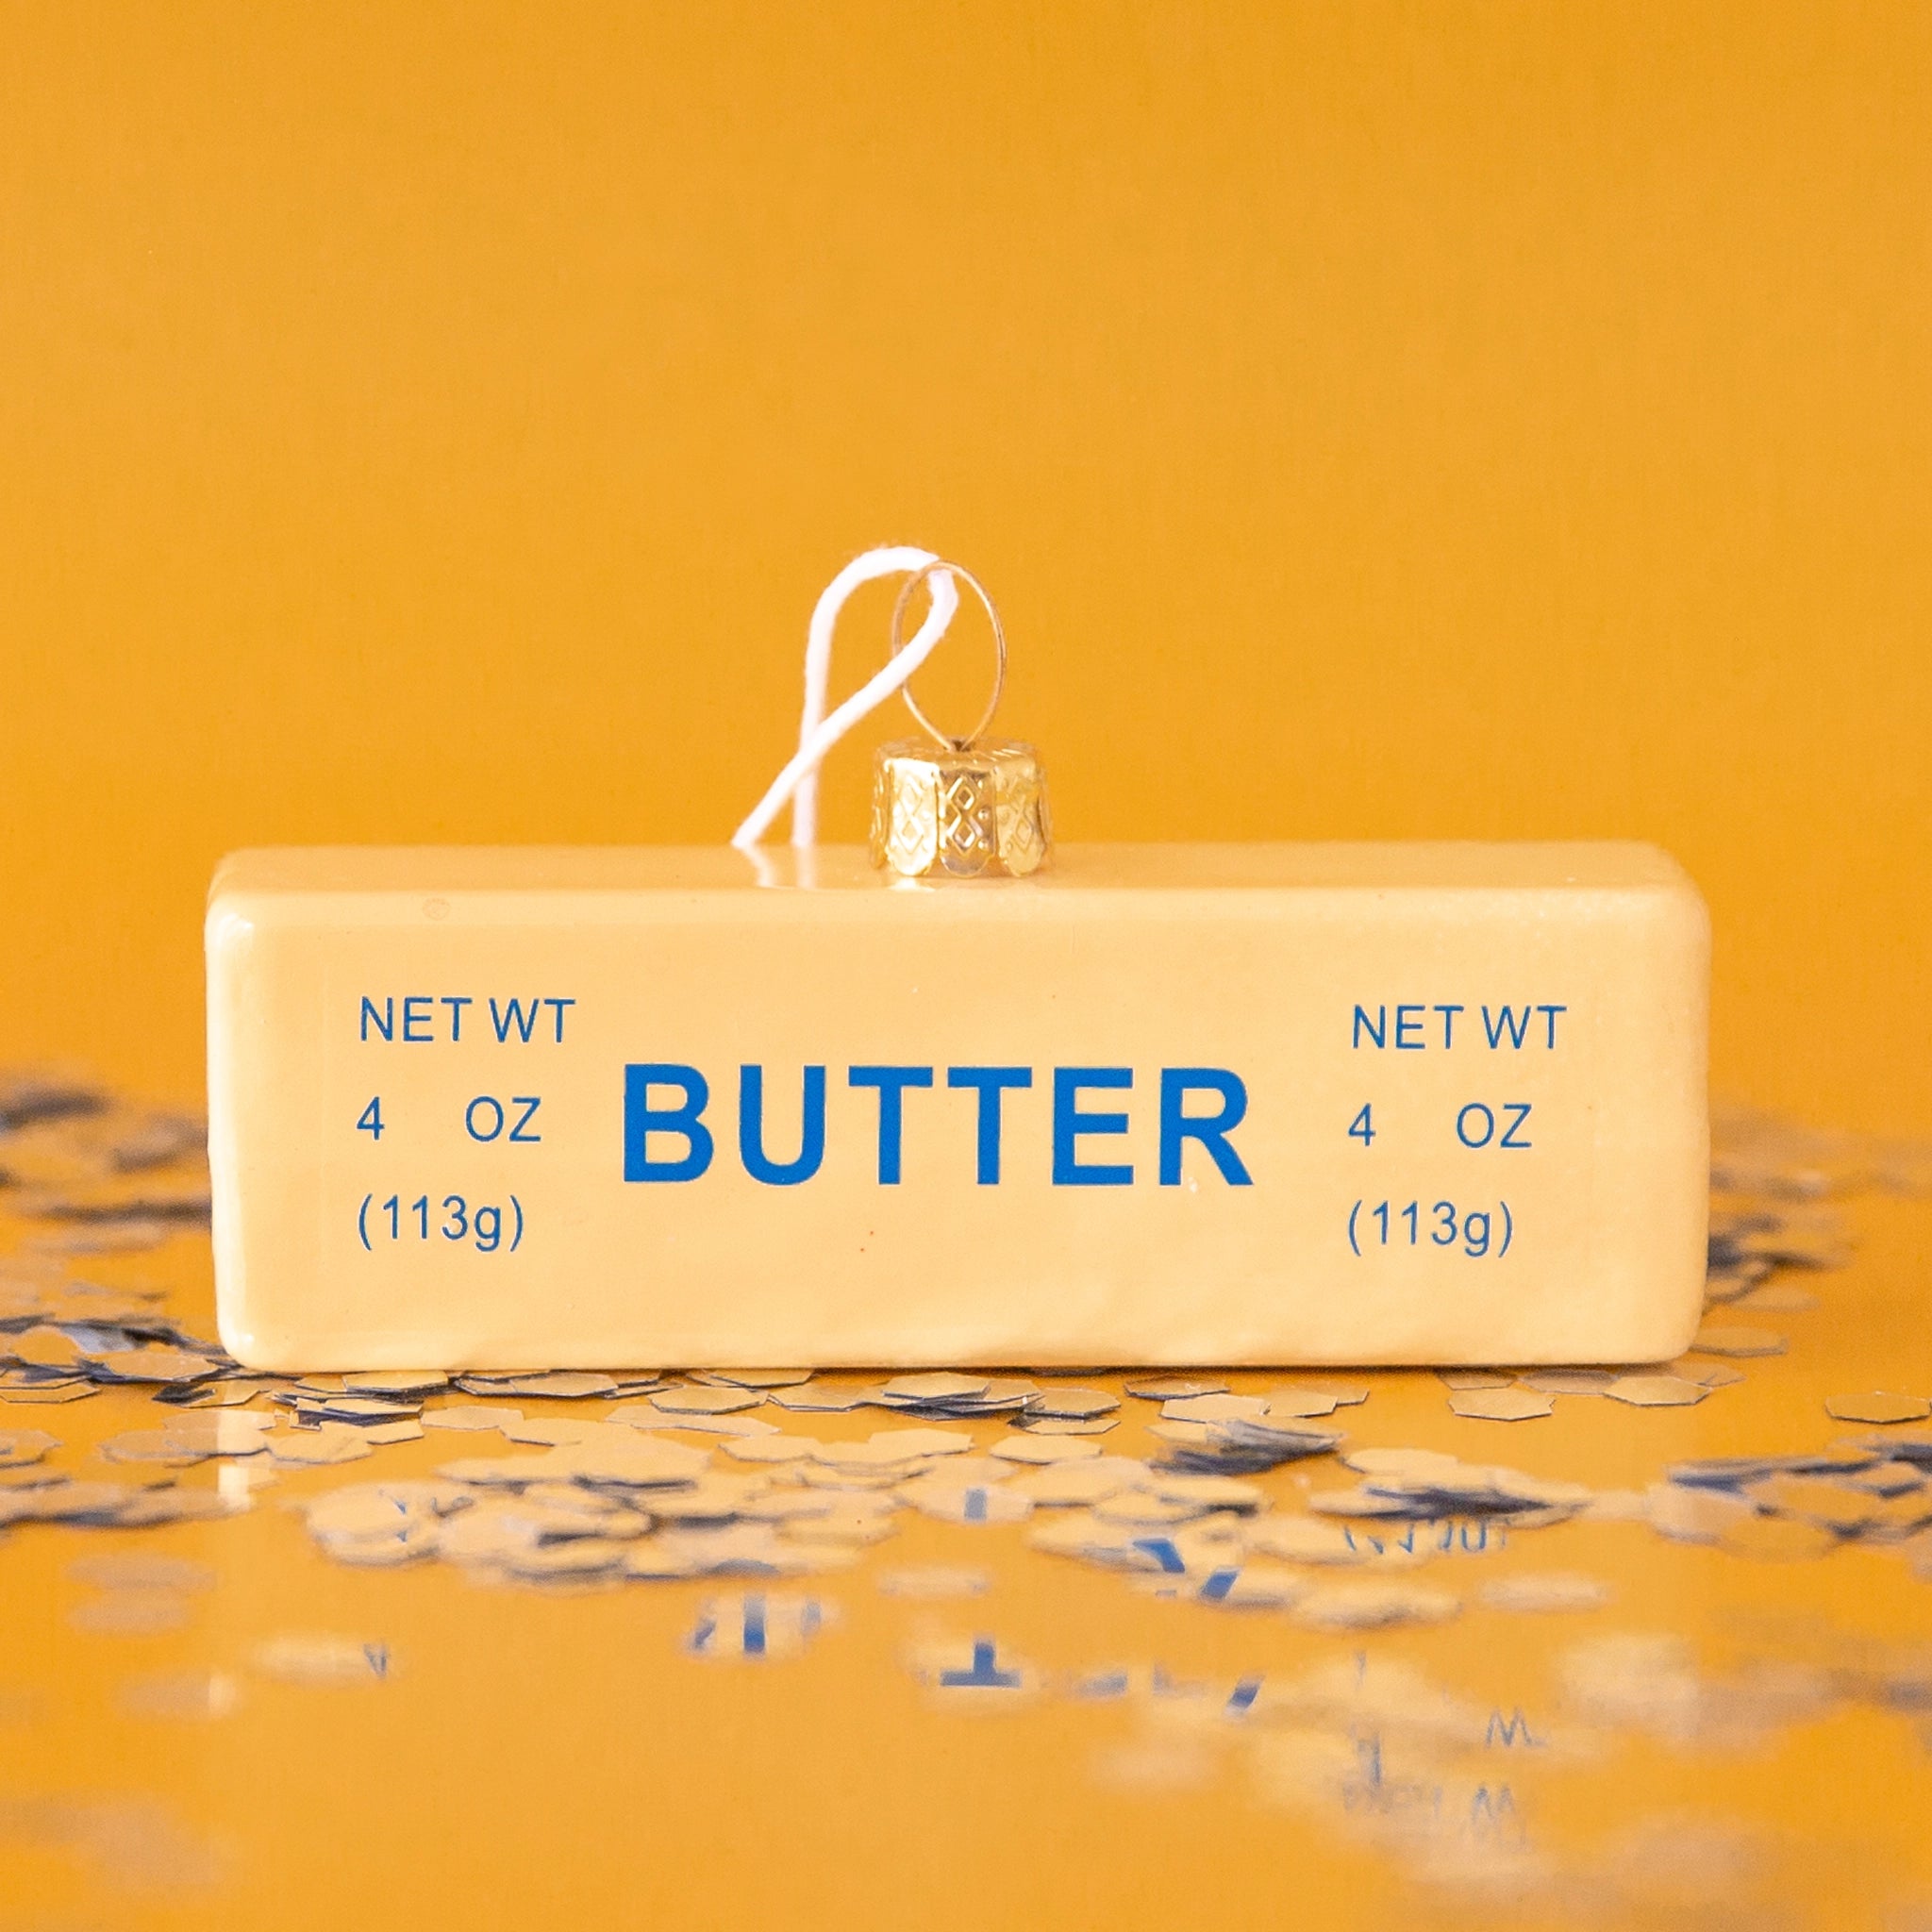 On a yellow background is a glass ornament in the shape of a stick of butter